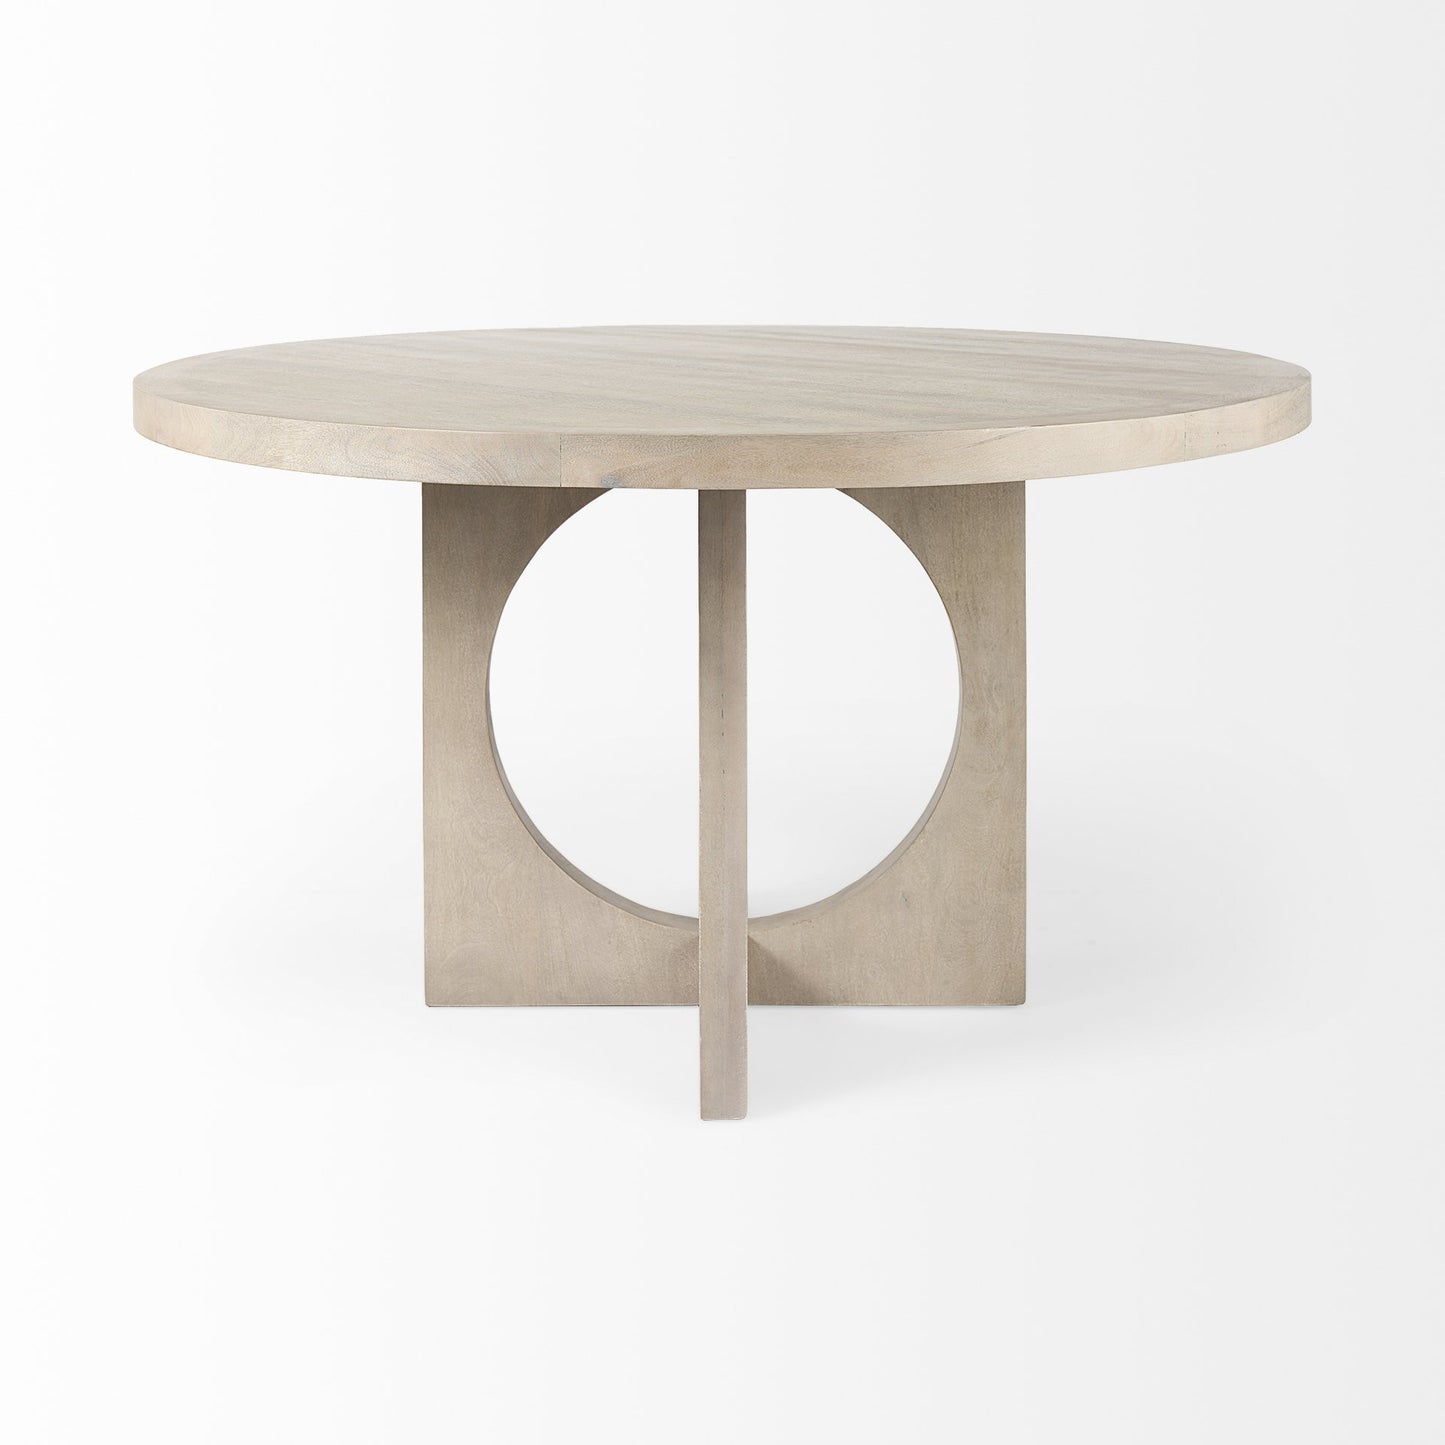 Light Natural Wood Round Geometric Dining Table-1